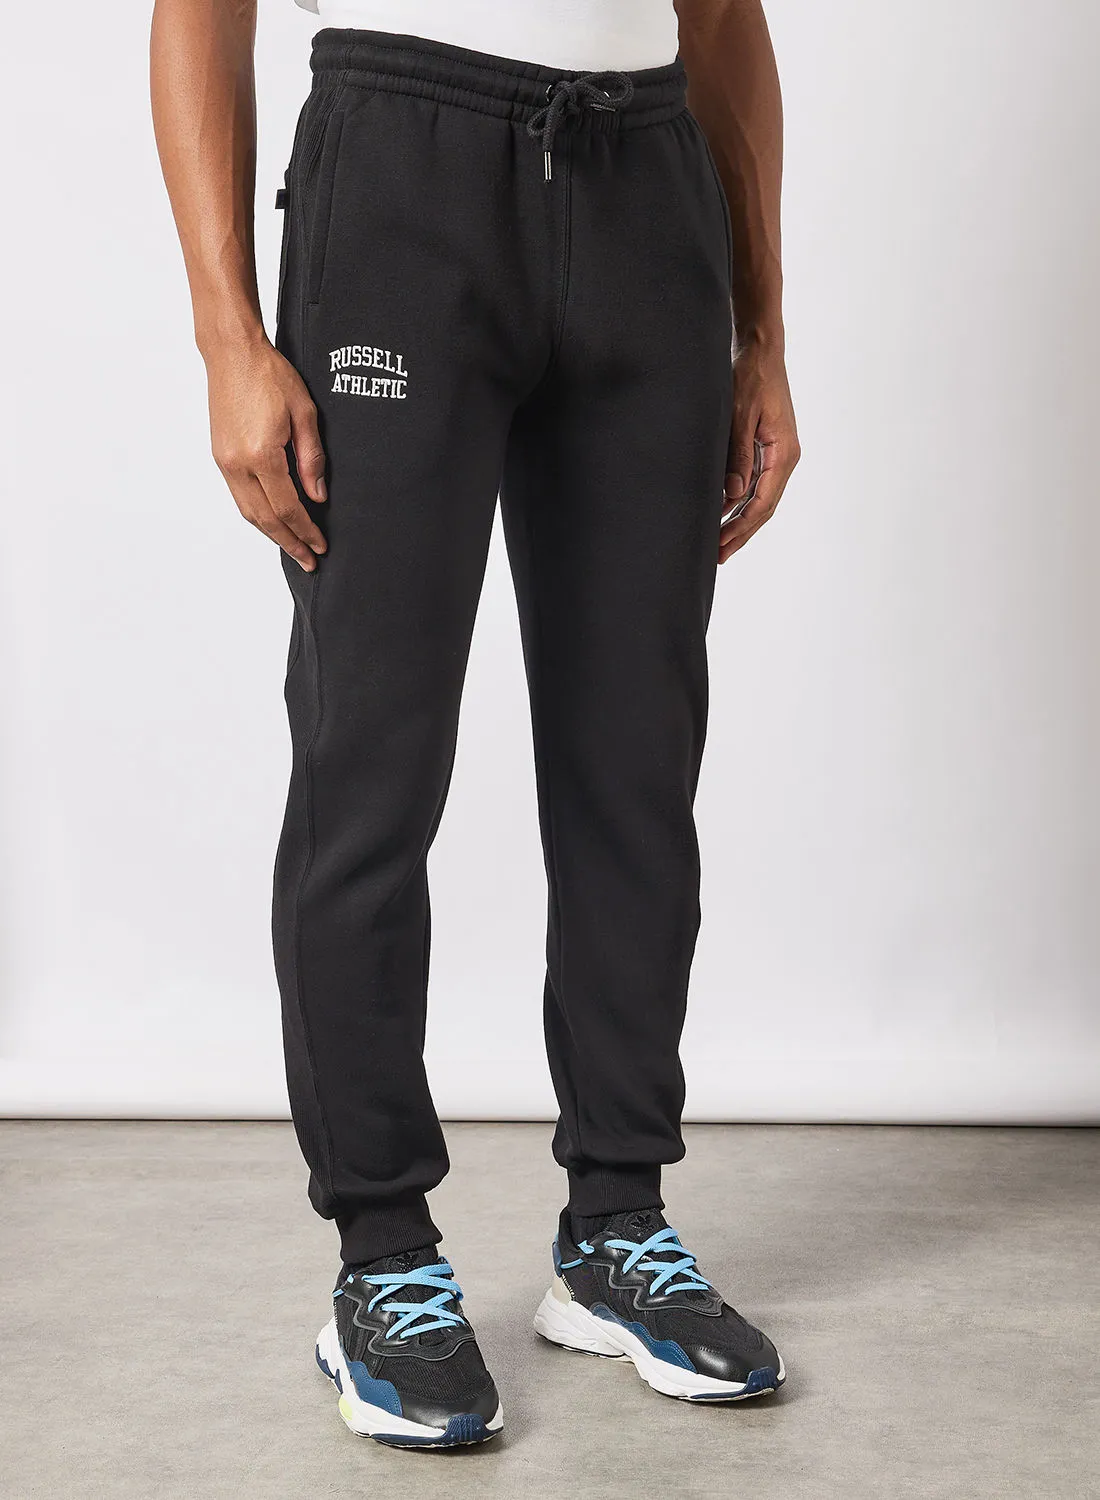 Russell Athletic Iconic Cuffed Sweatpants Black